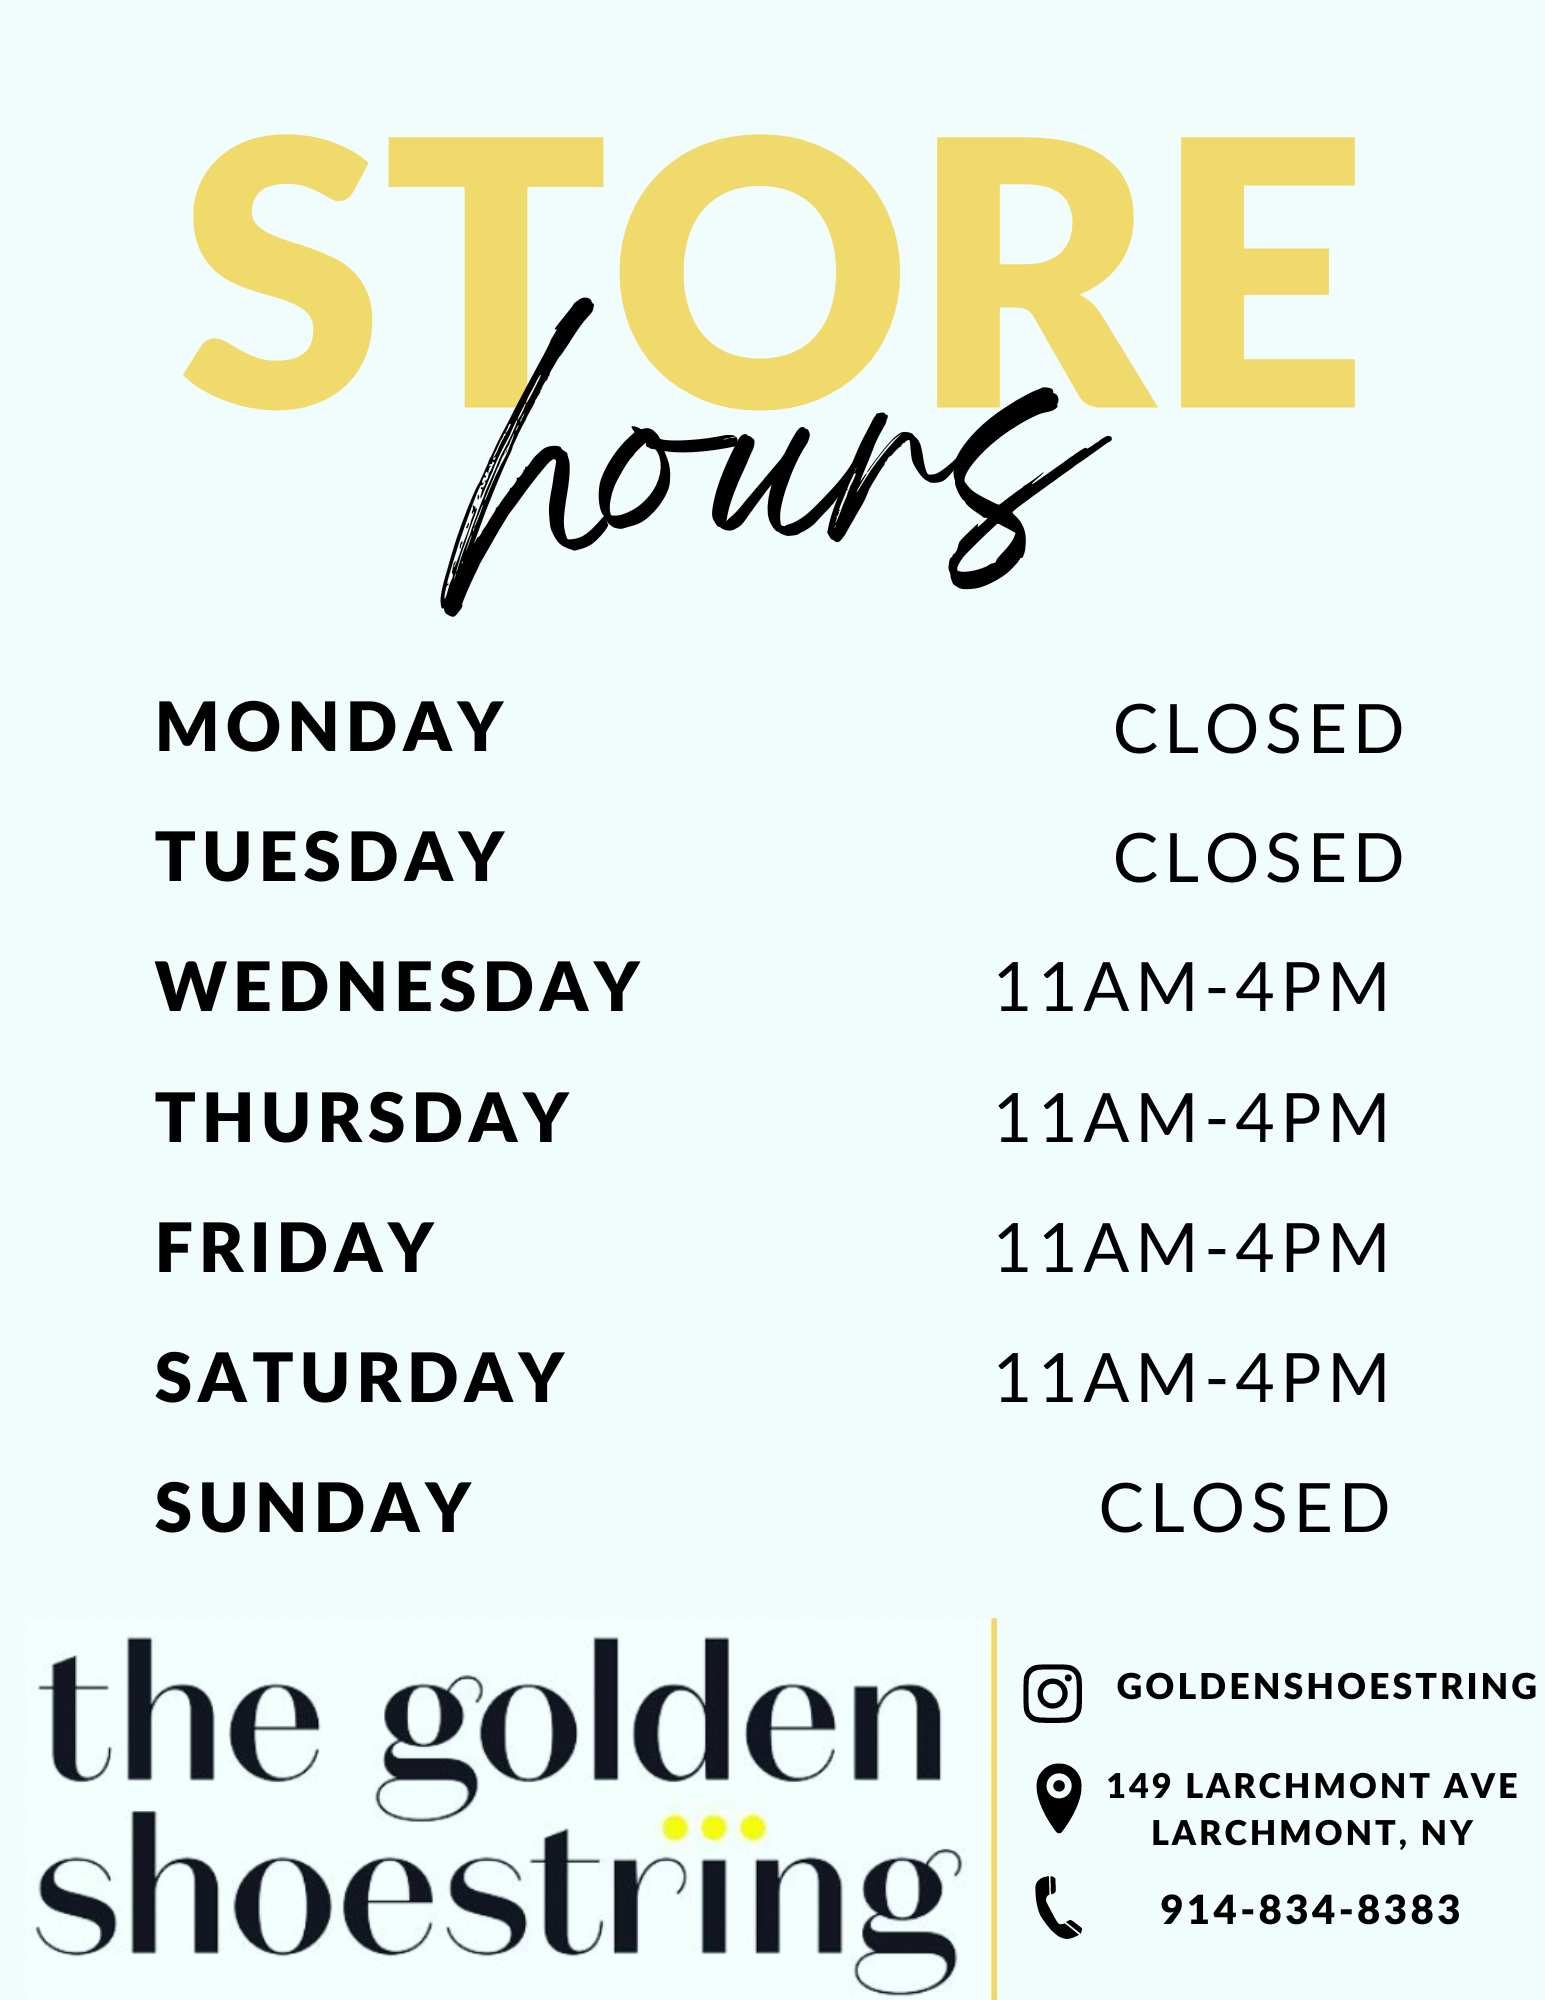 Store Hours for Golden Shoestring Closed Sunday through Tuesday. Open Wednesday through Saturday from 11 am to 4 pm